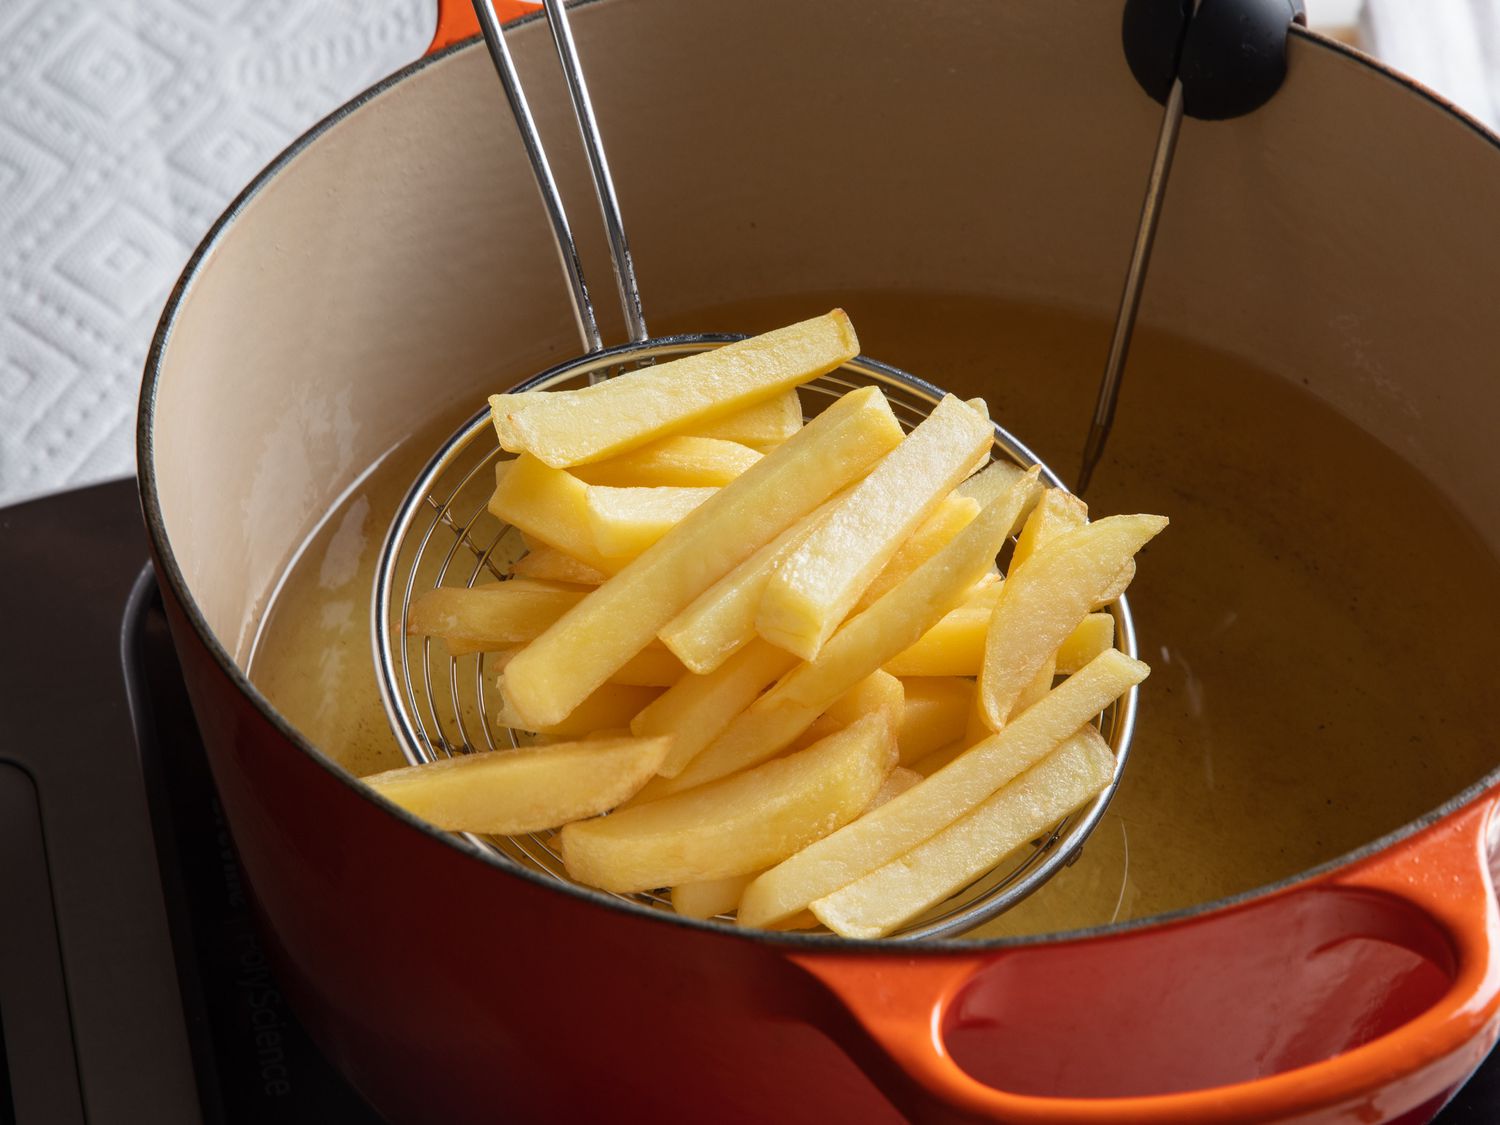 After their second fry, the French fries are very lightly golden, but still not crispy.